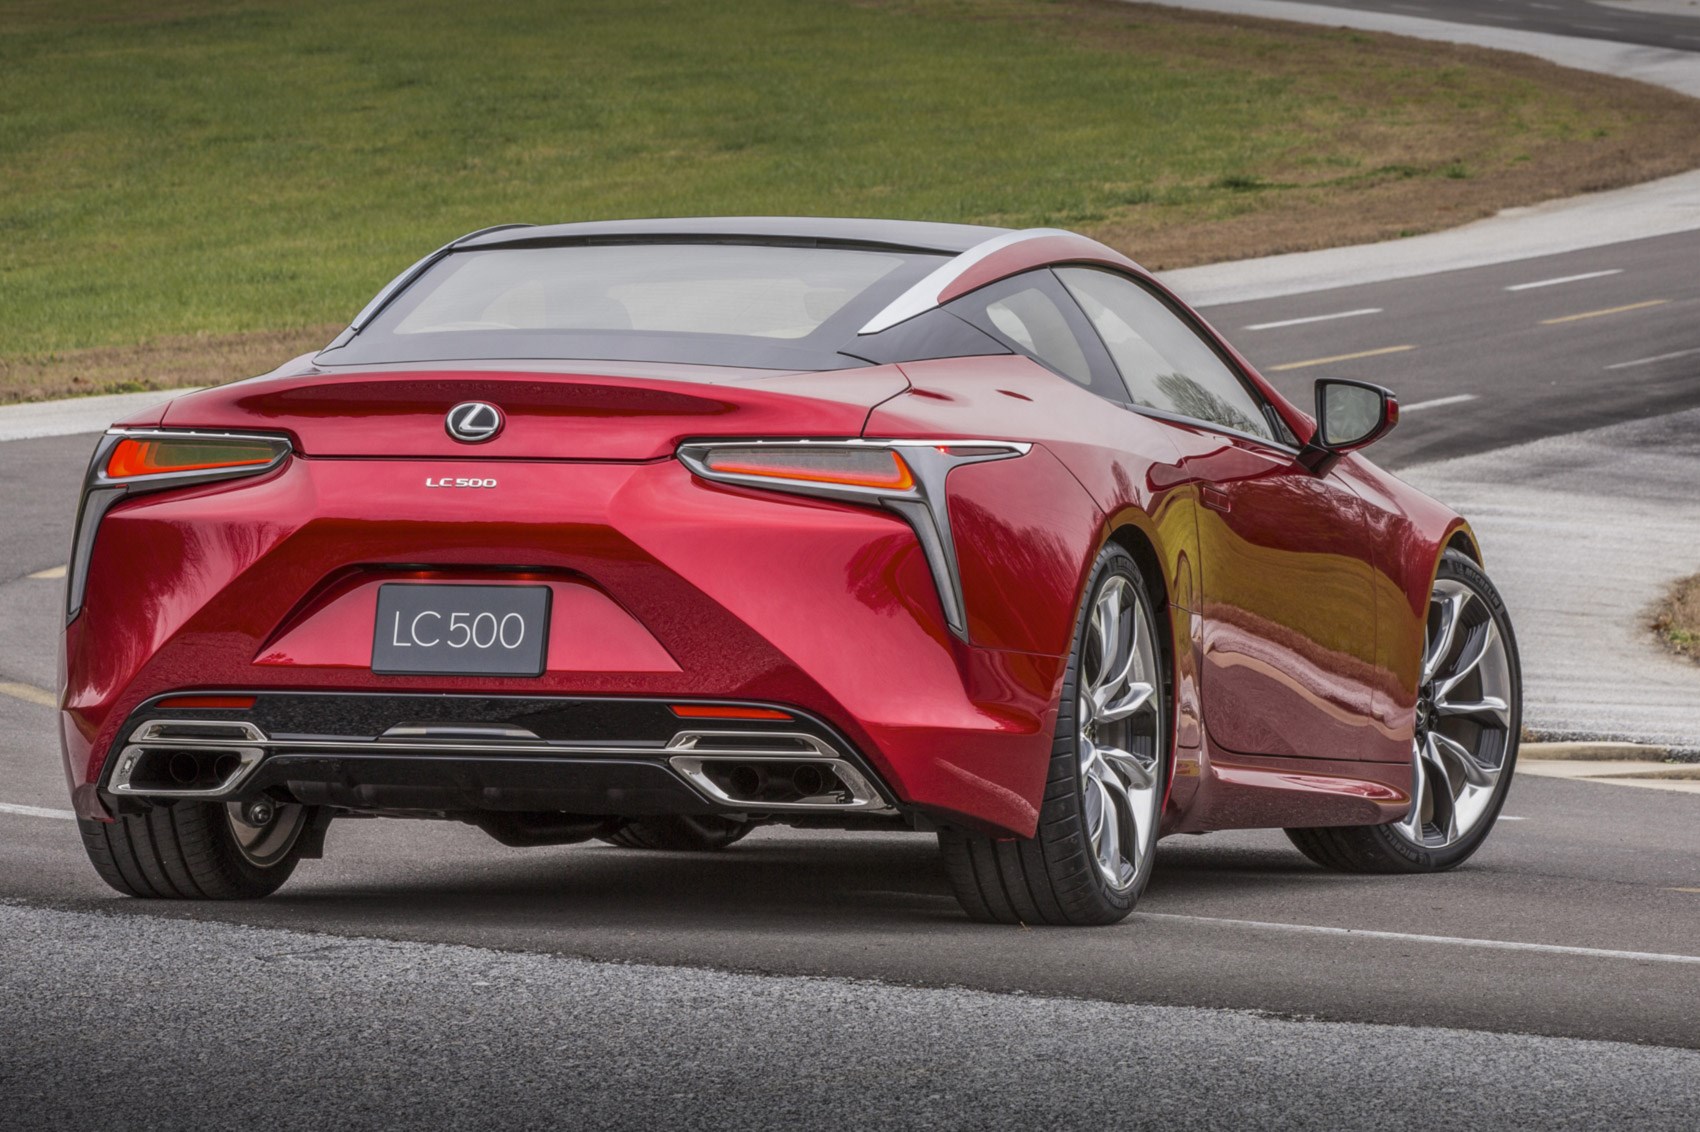 Lexus rolls out the big guns new 467bhp LC 500 coupe revealed in